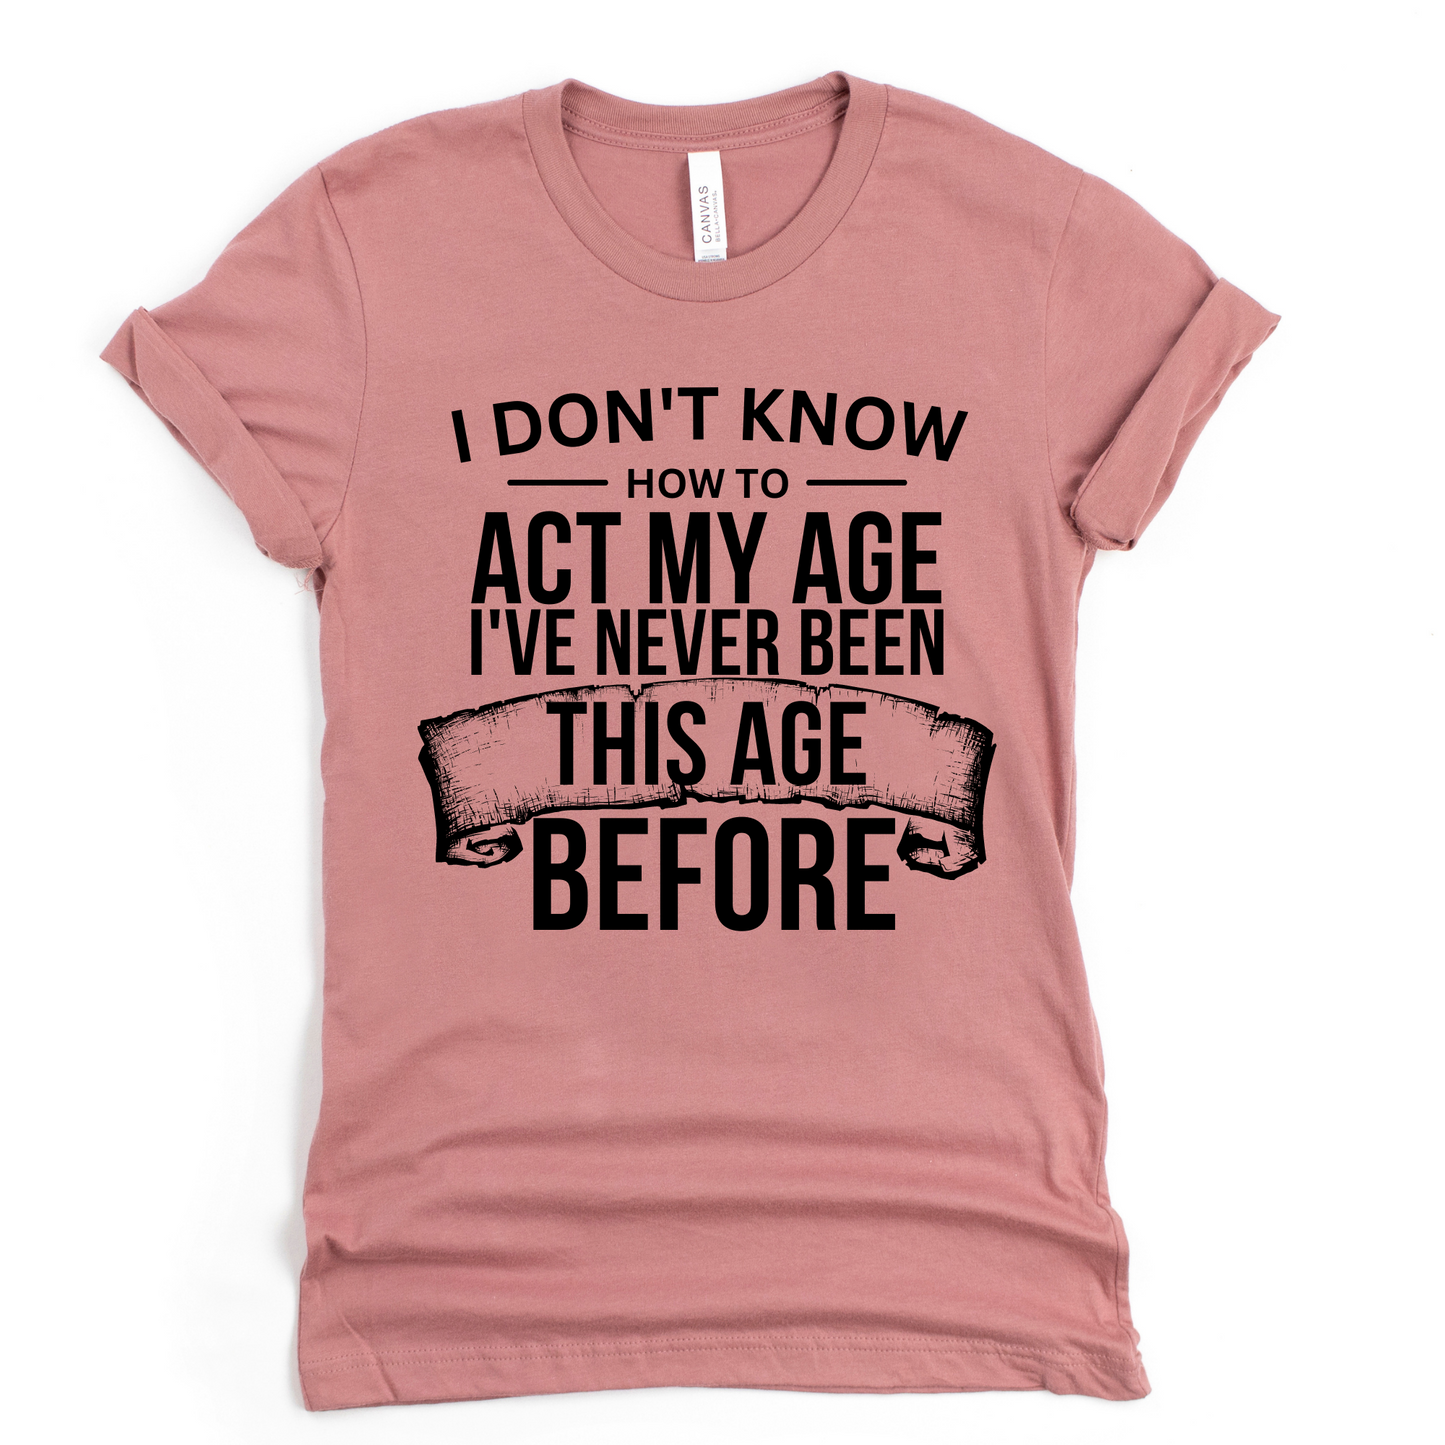 Act my age